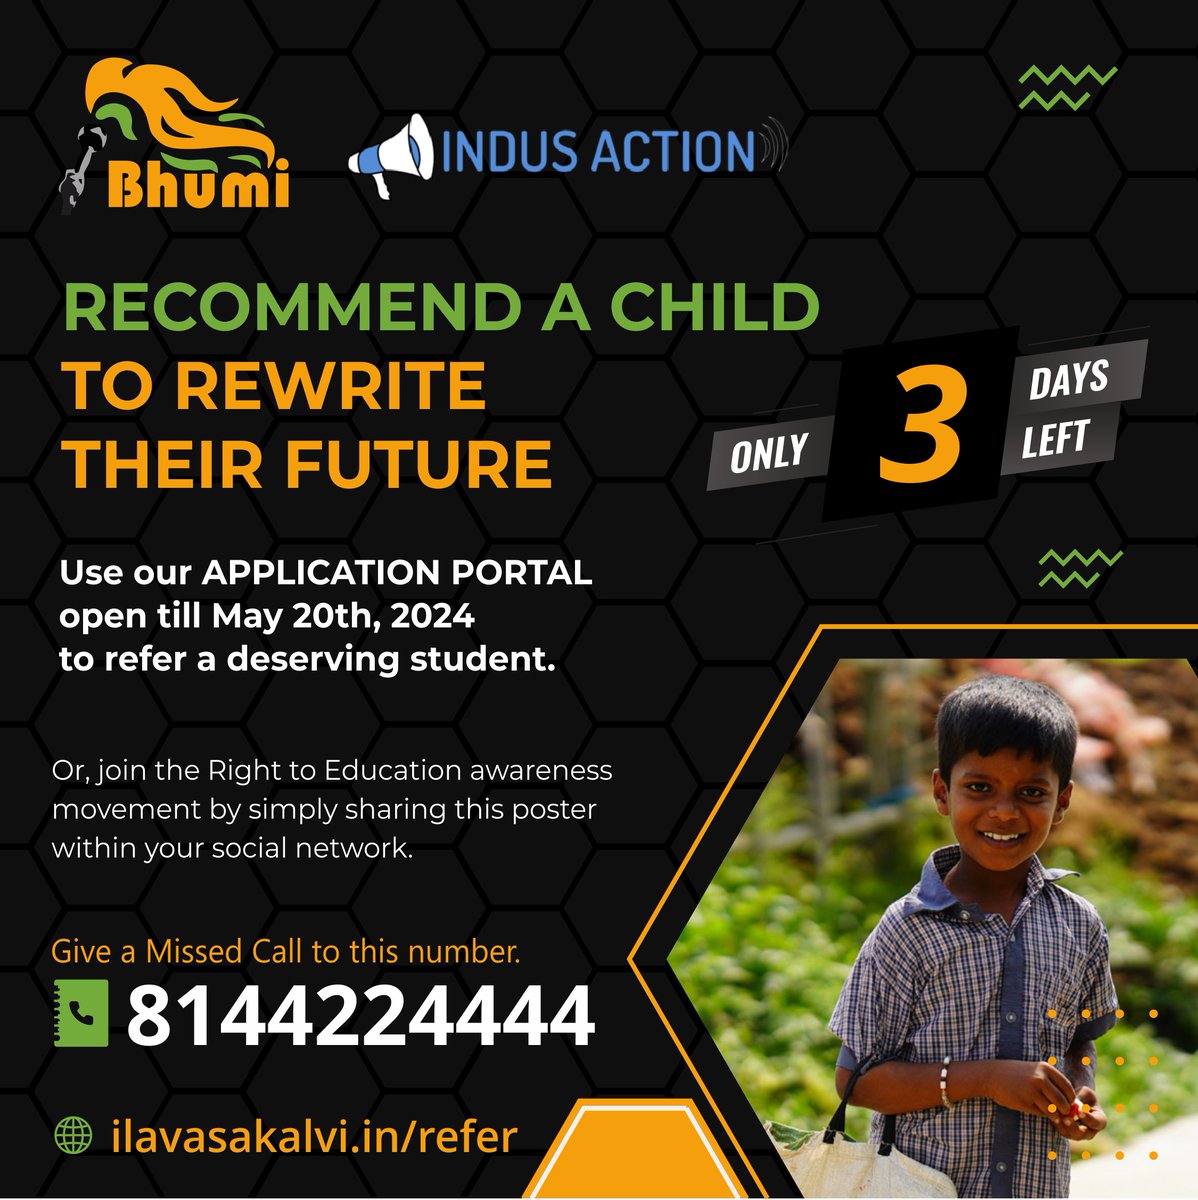 🚀 Just 3 Days Left to Make a Difference! 🚀

Recommend a child for FREE education in esteemed private institutions across Tamil Nadu in our portal - ilavasakalvi.in/refer

Hurry! The enrolment for LKG and 1st standard closes on May 20th, 2024. 

#RTE #RightToEducation #Bhumi